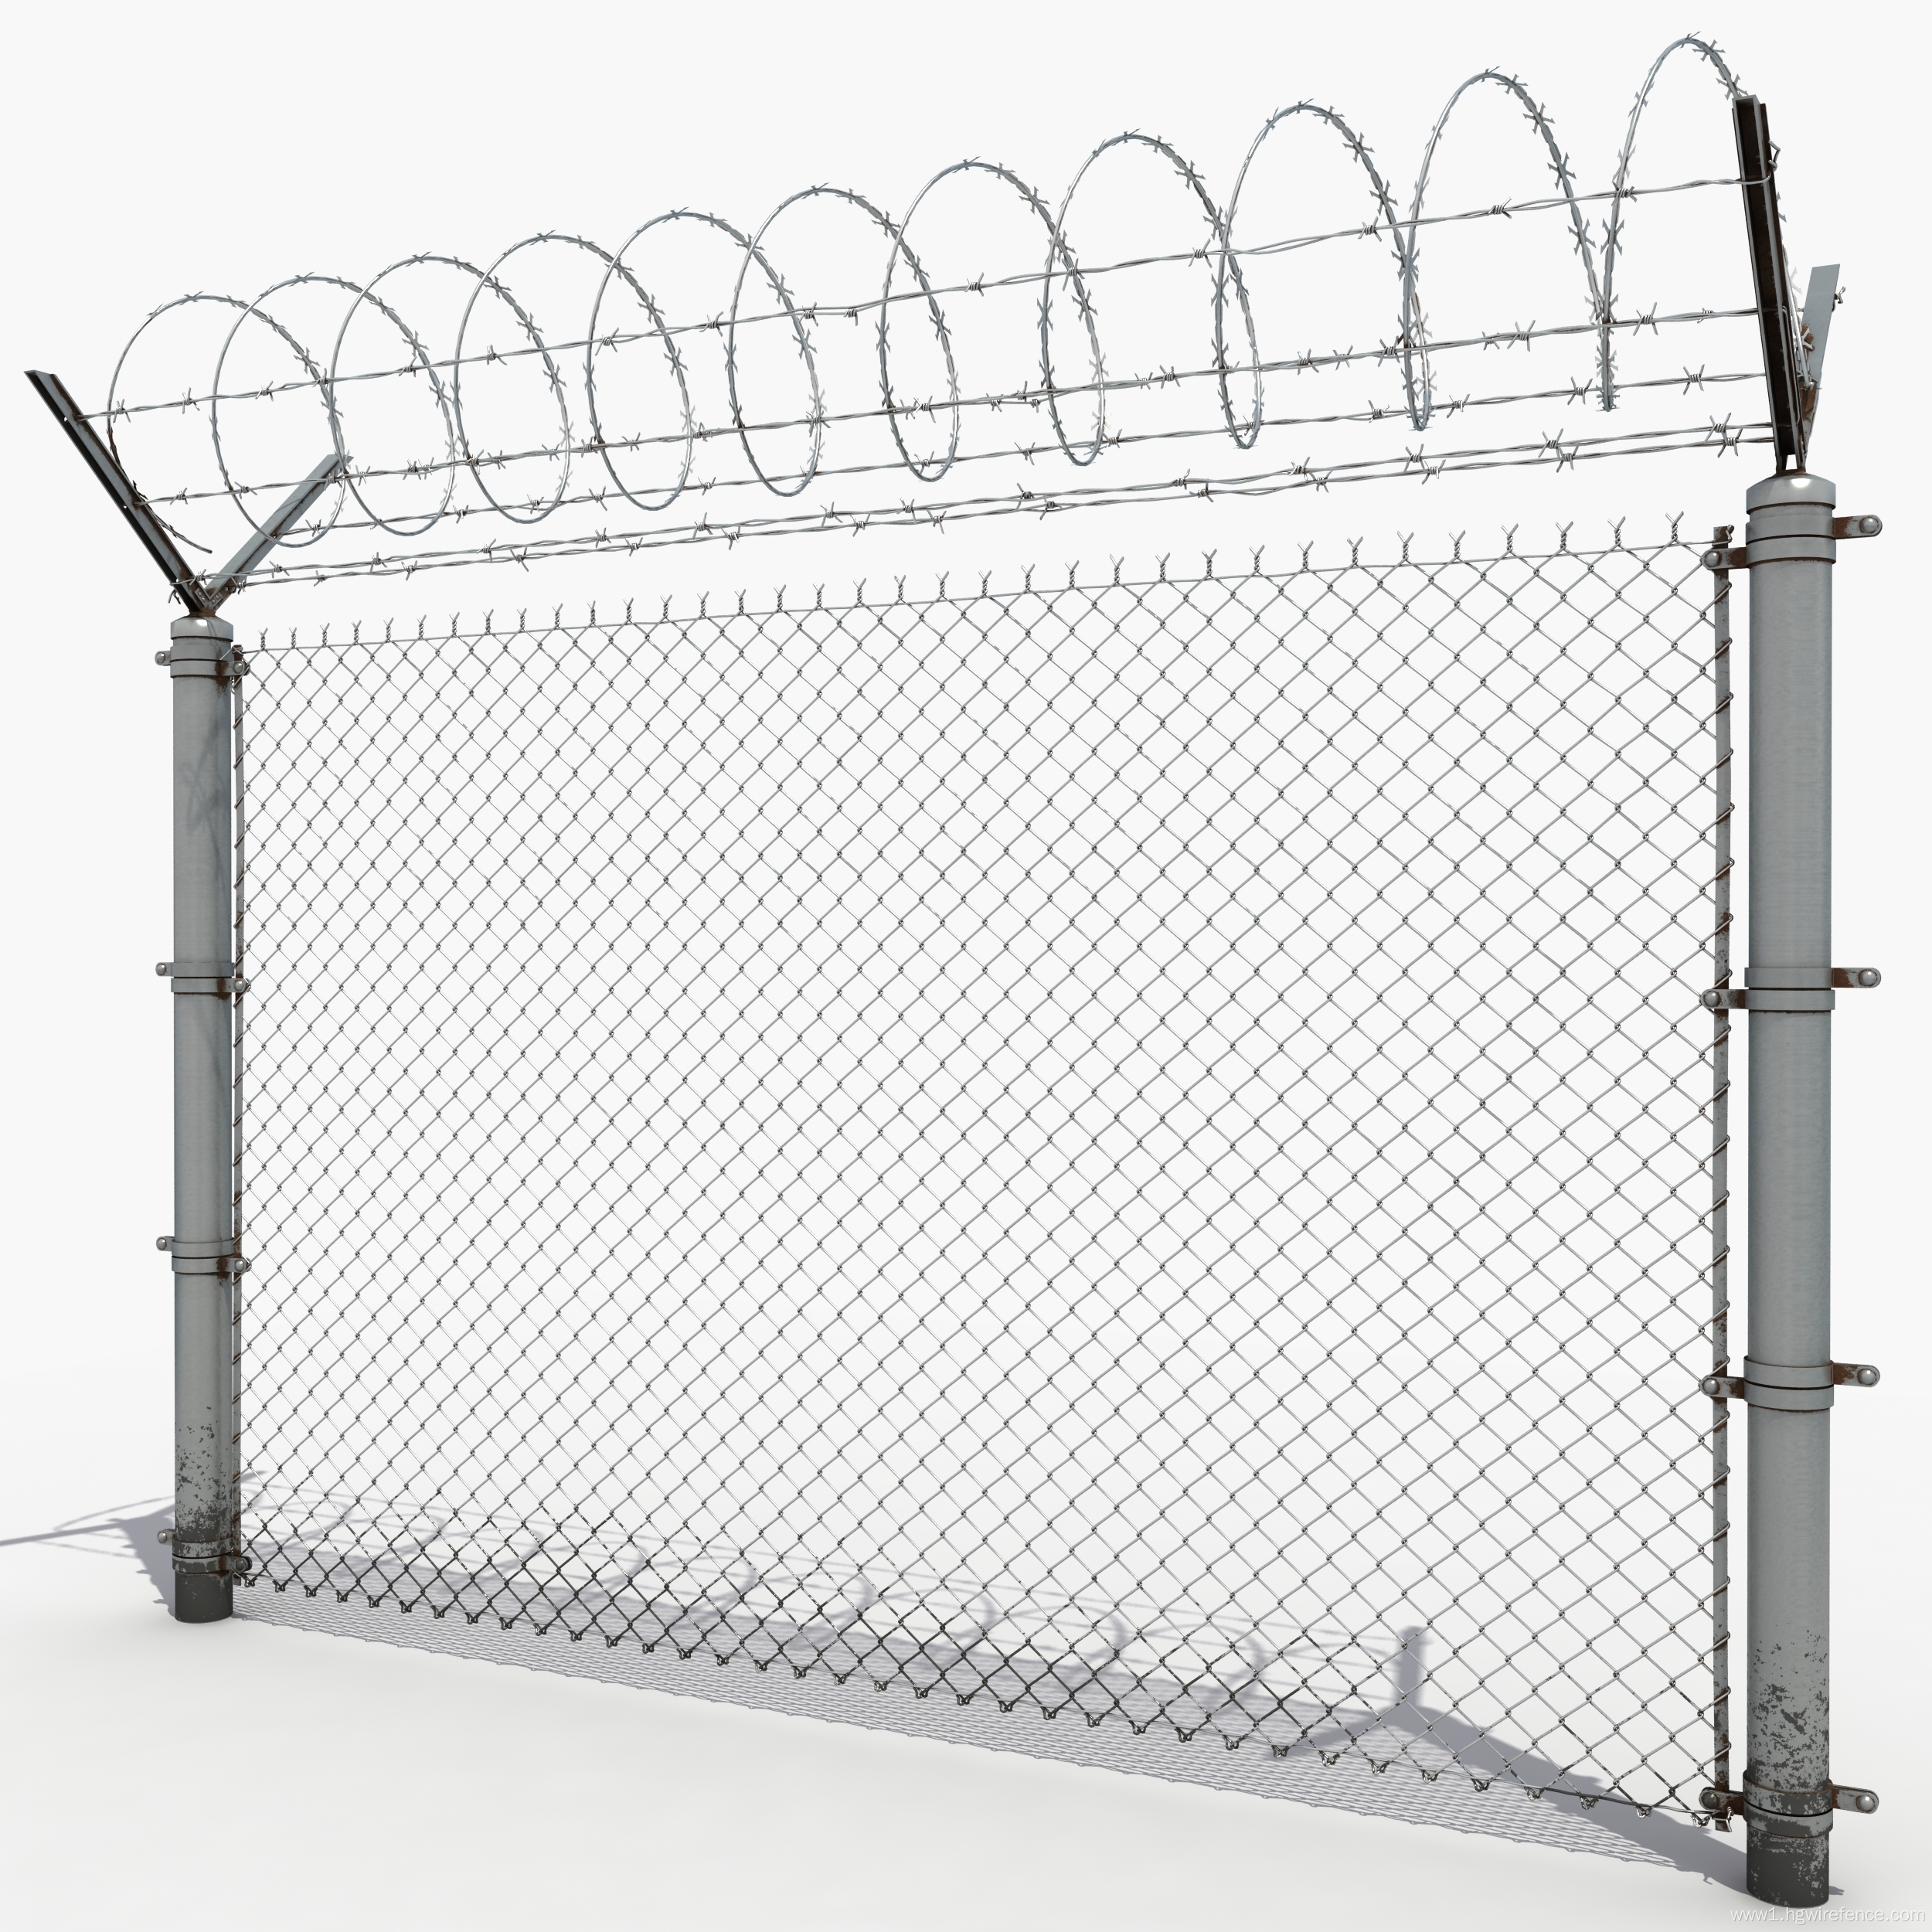 post PVC coated fence chain link fence